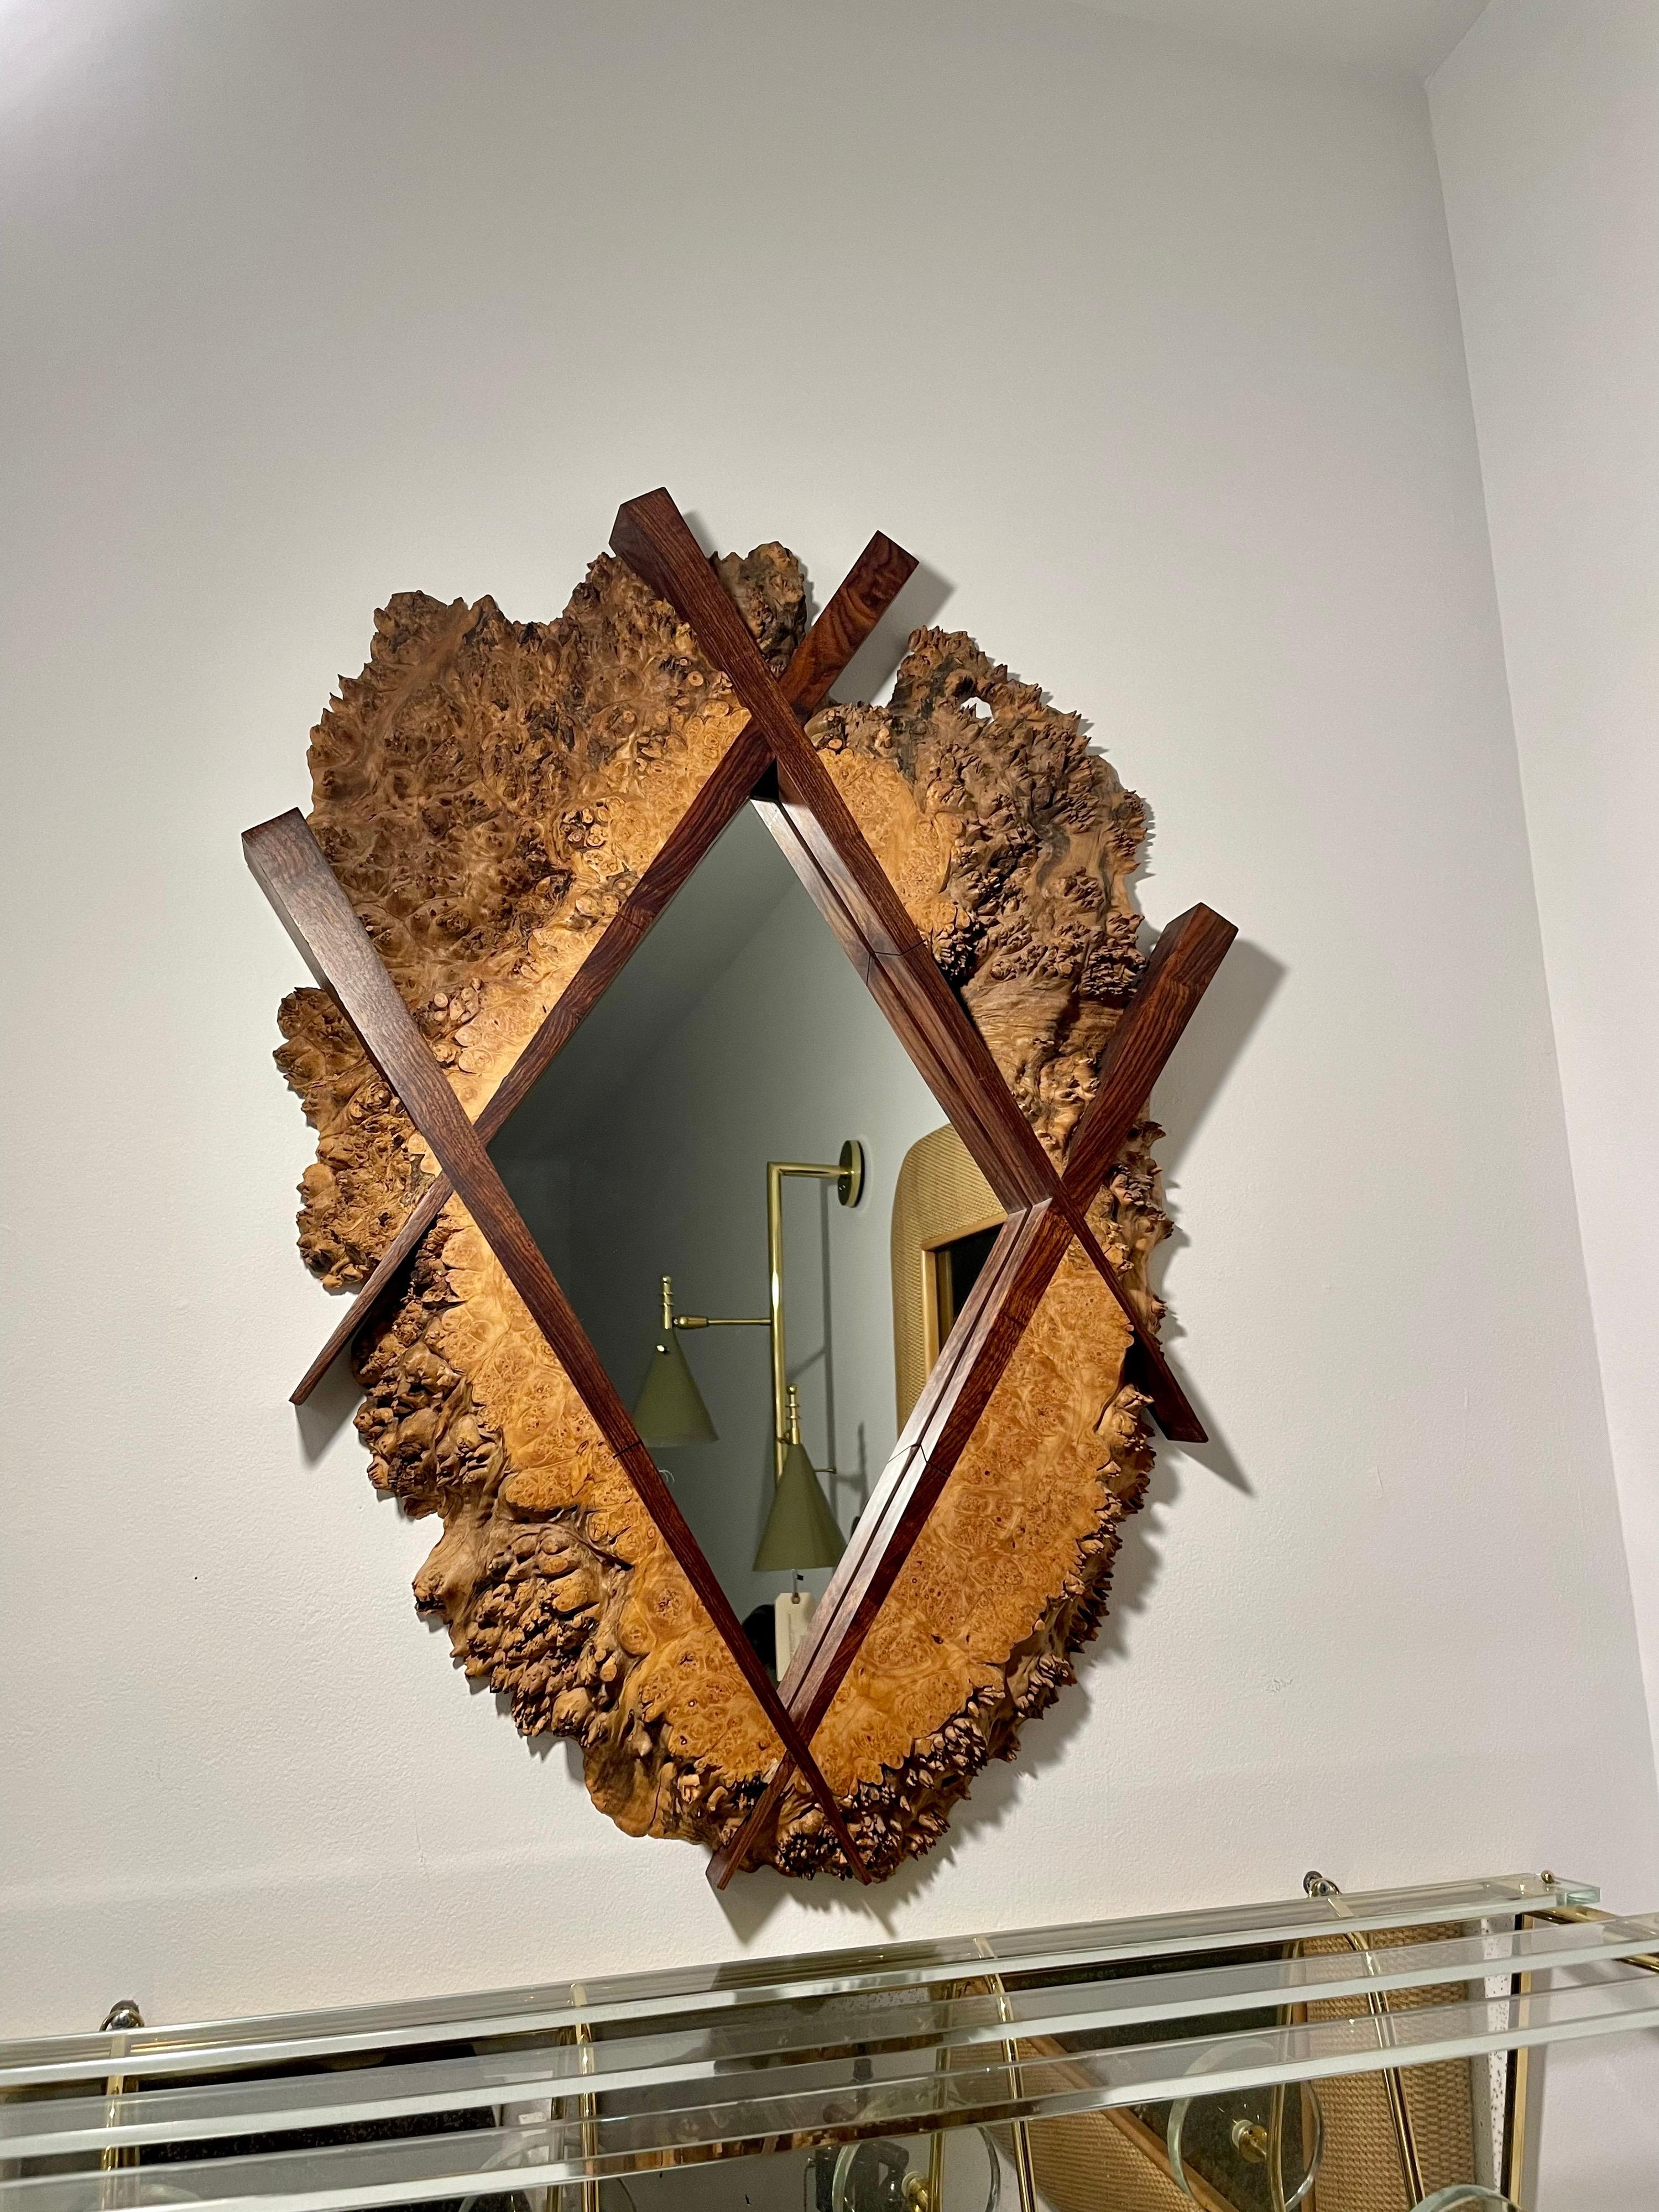 Phenomenal organic tree section of maple burl and framed with walnut - intricately crafted and pencil signed to verso (faded partial signature still noticeable). Diamond shaped mirror - all vintage.